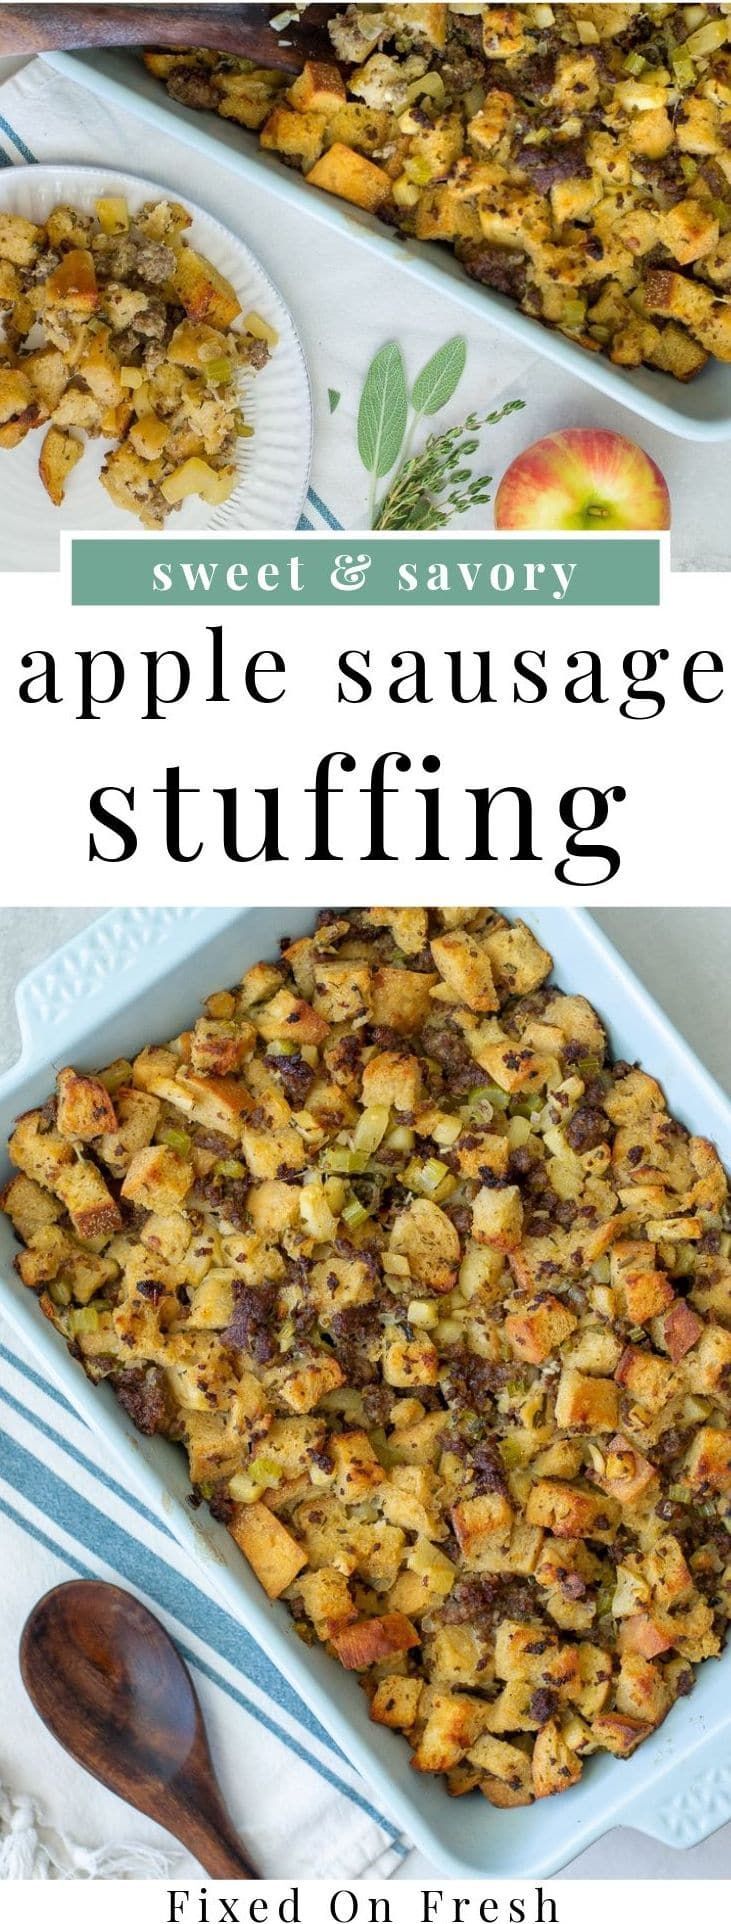 Sourdough Apple Sausage Stuffing - Fixed on Fresh -   18 stuffing recipes thanksgiving easy ideas